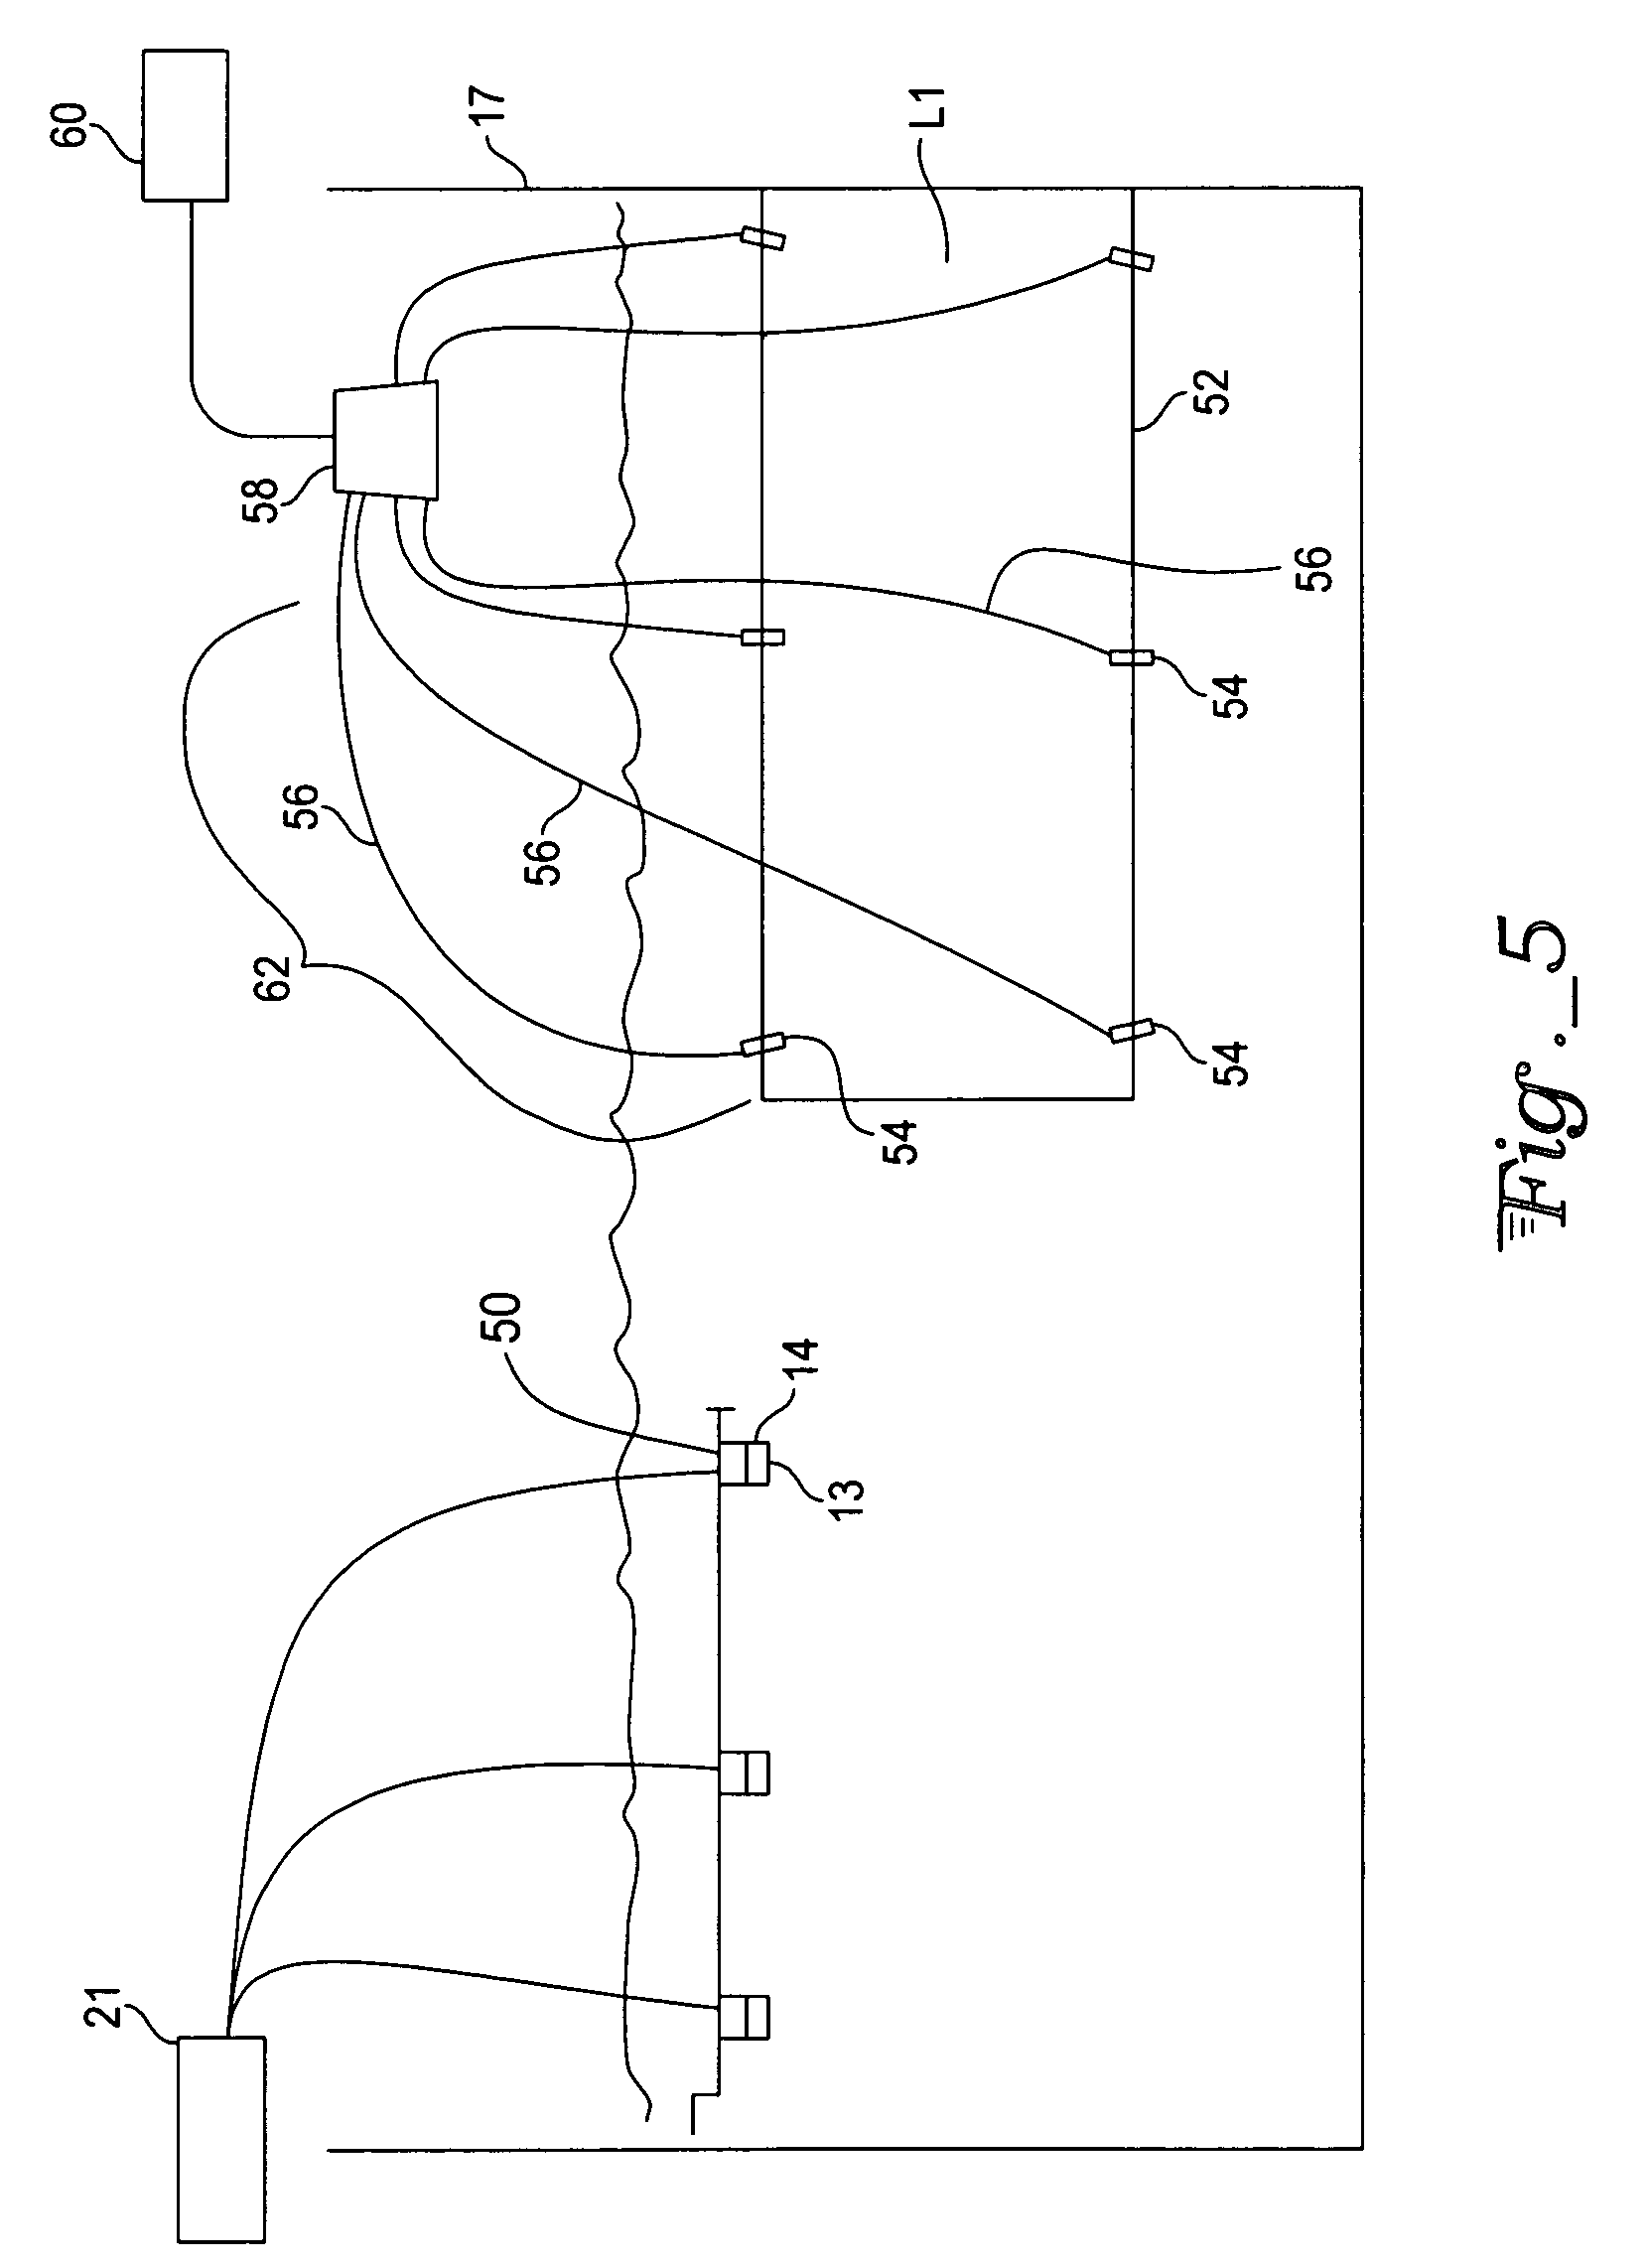 Method and device for measuring cavitation